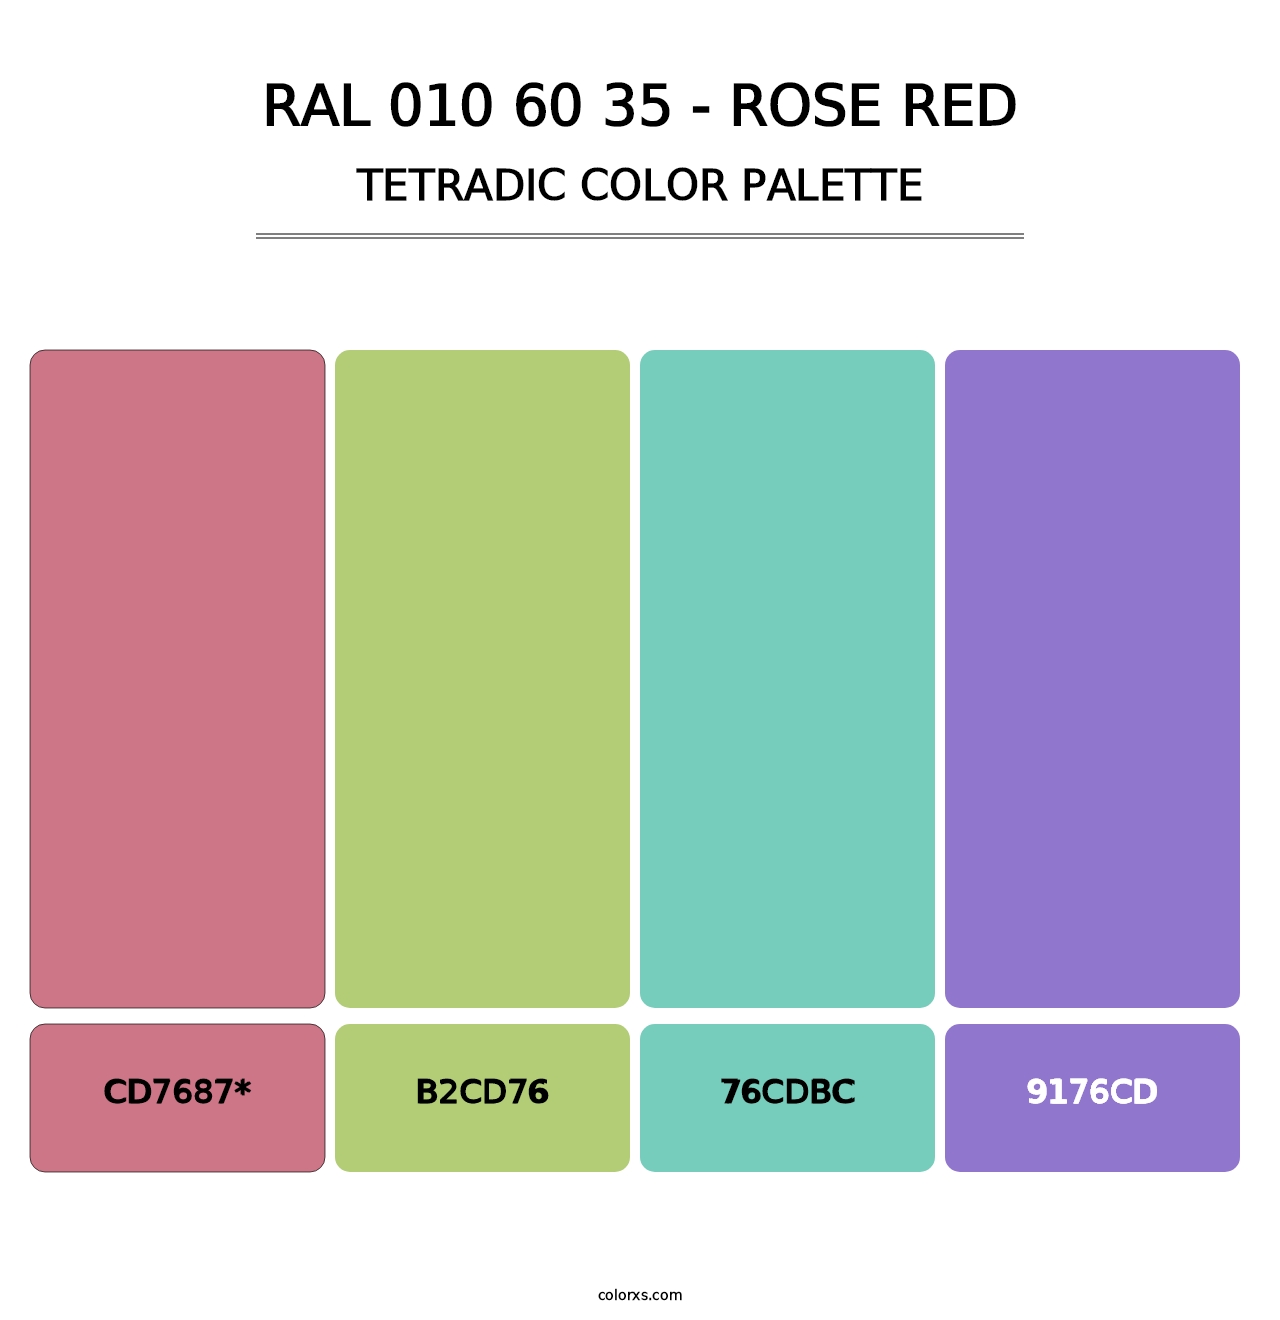 RAL 010 60 35 - Rose Red - Tetradic Color Palette